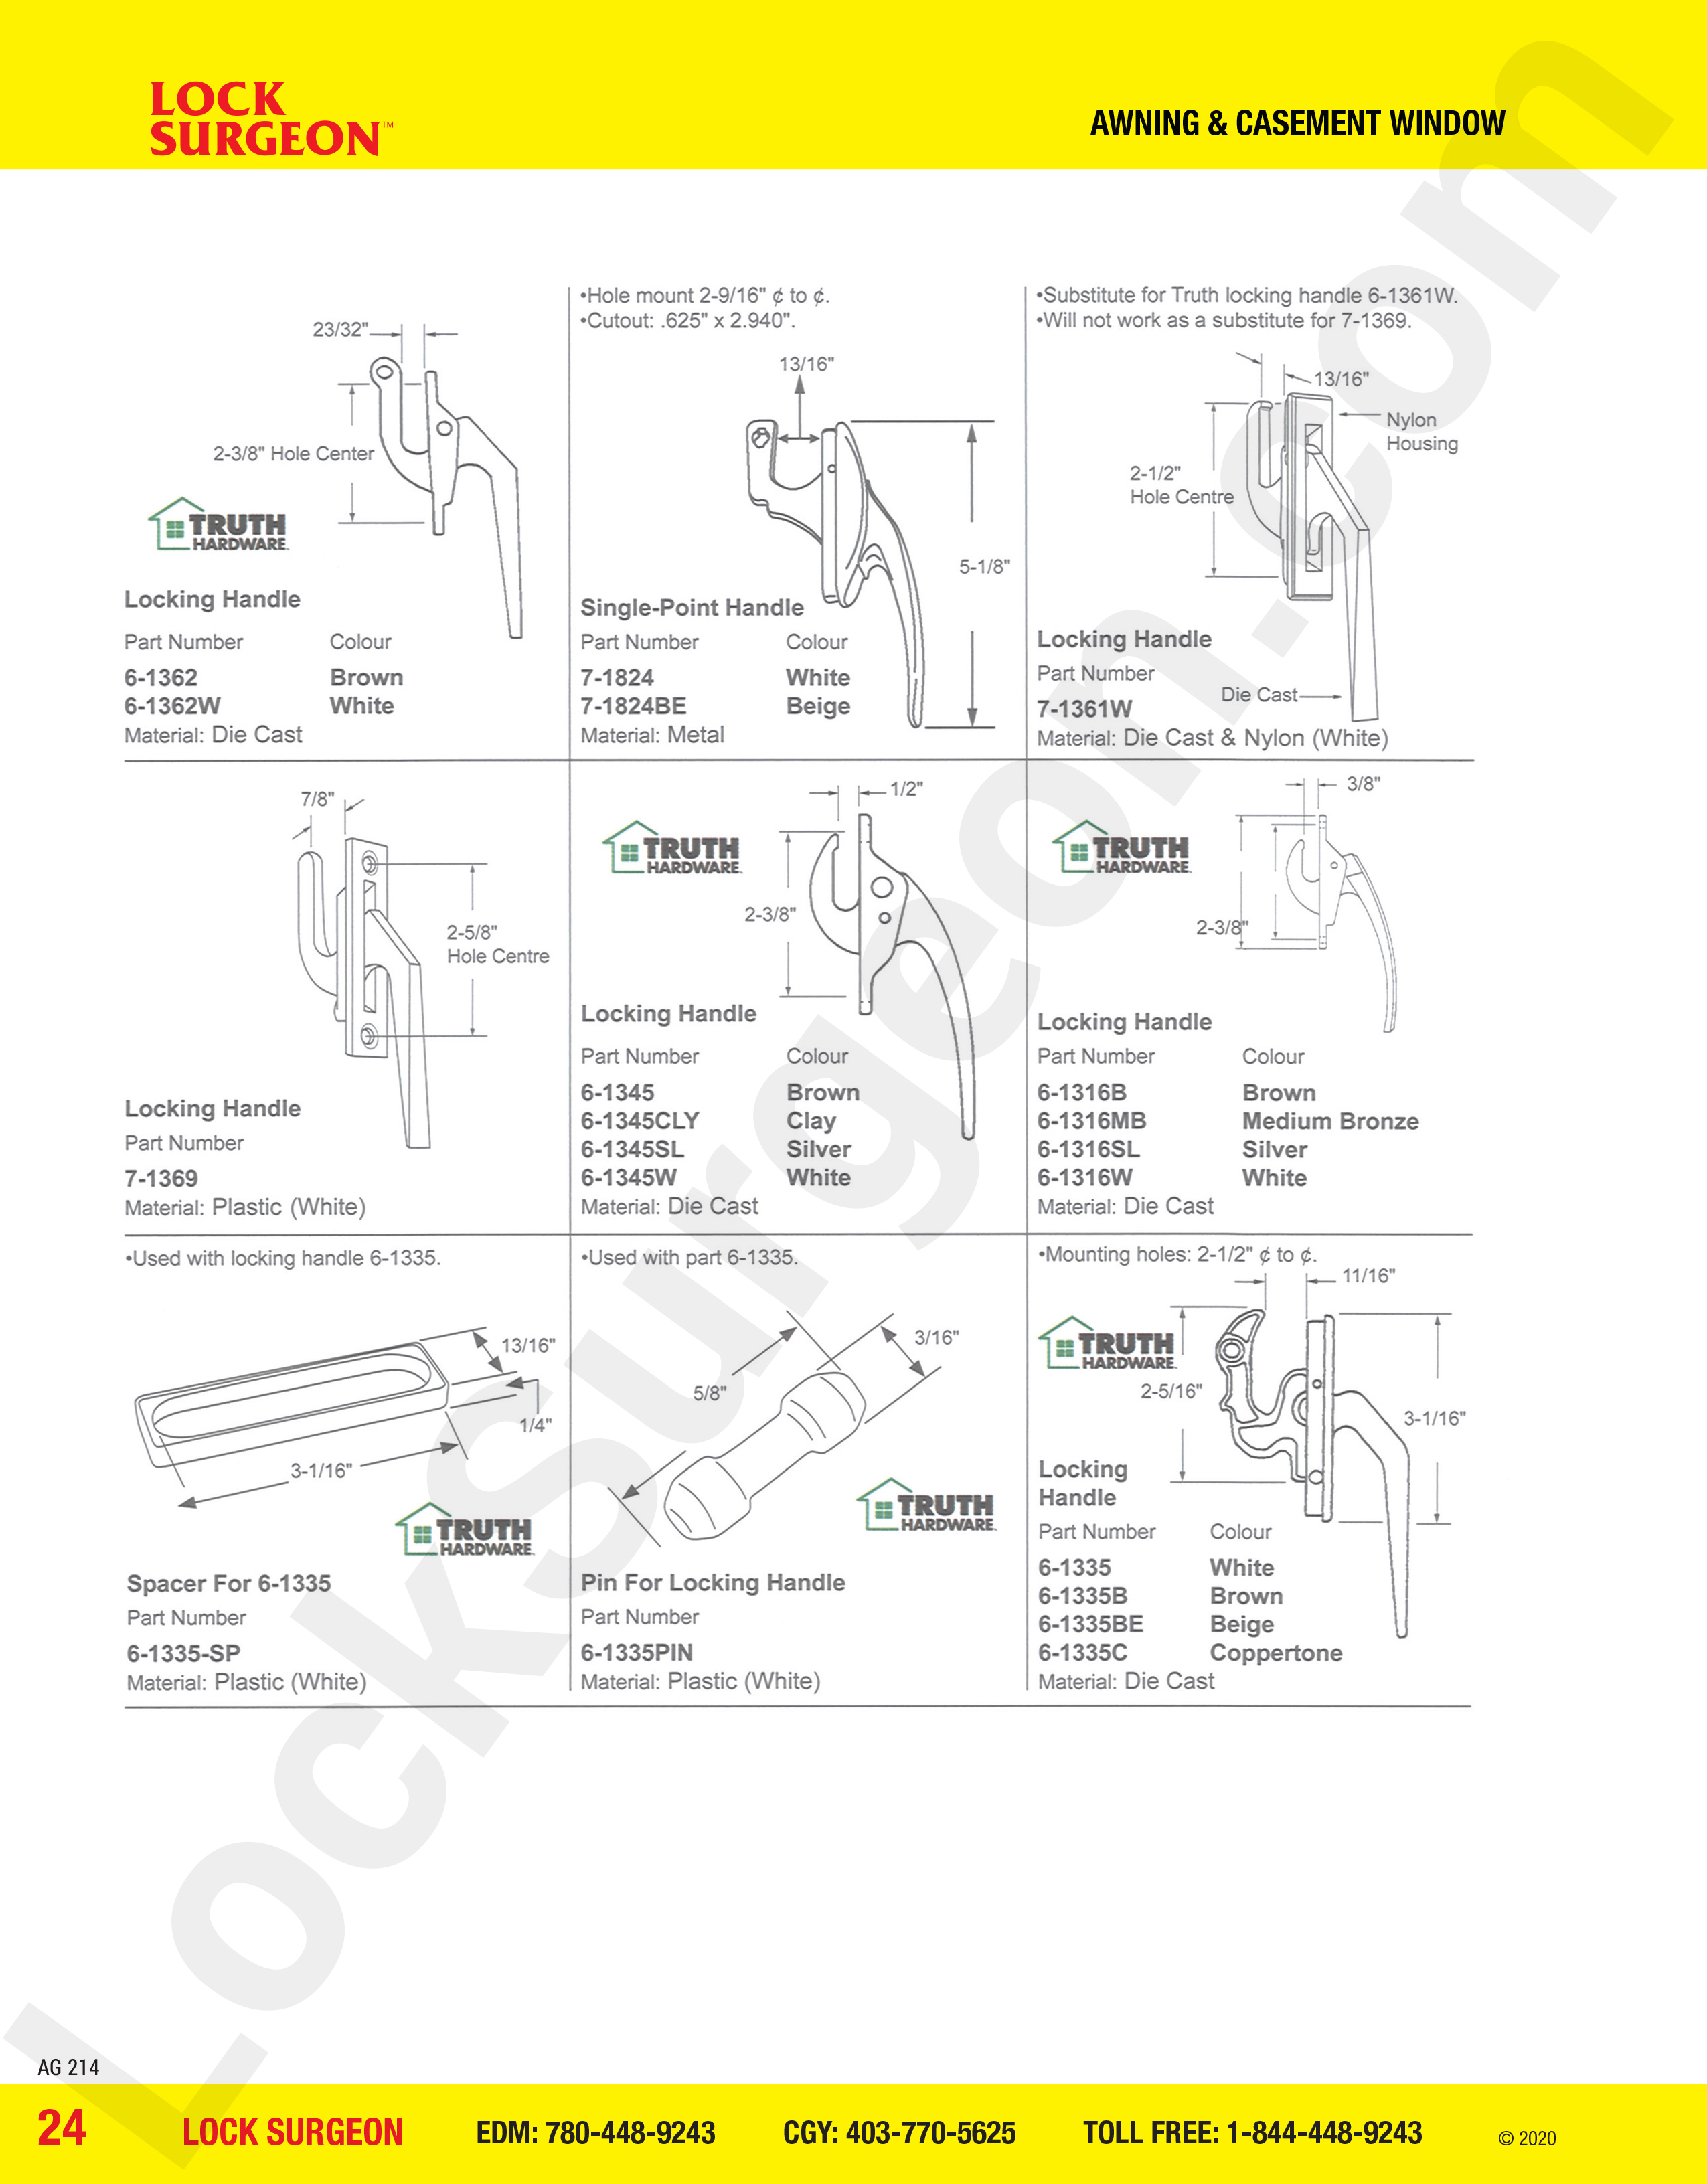 awning & casement window parts locking handles die cast, single-point, nylon, plastic spacers, pins.